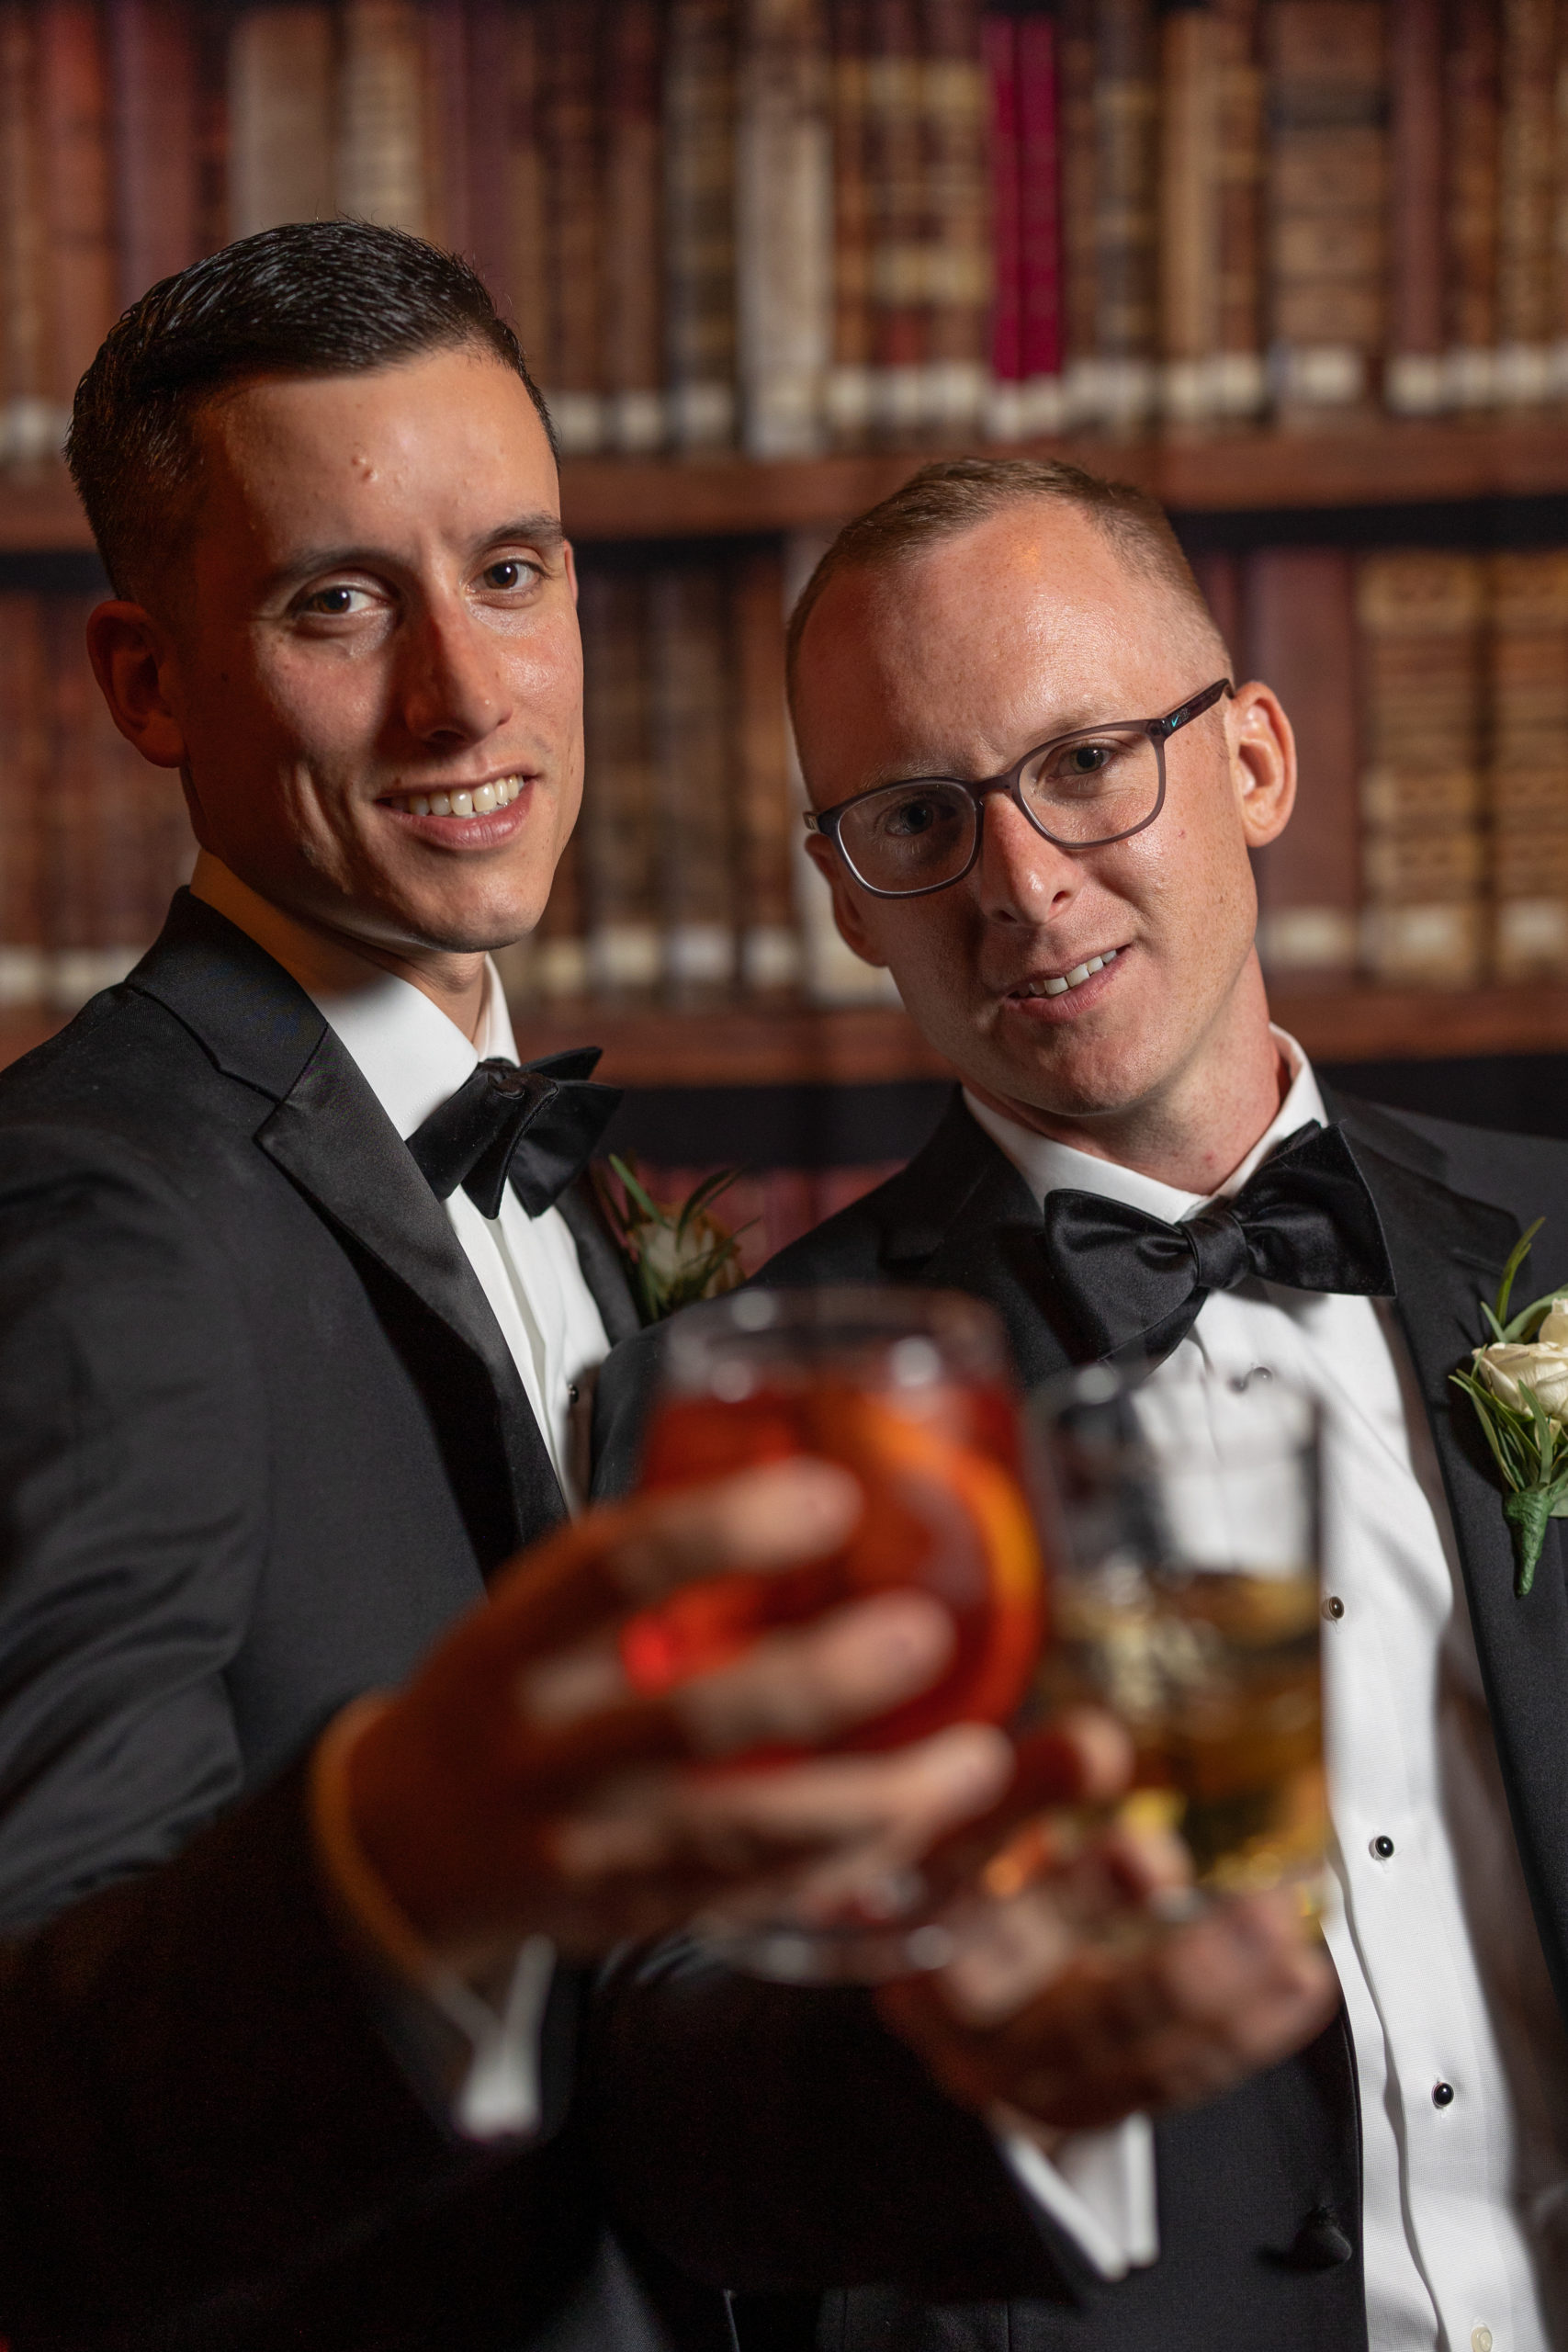 Groom and Groom share a drink at the Westmoreland Club in Wilkes-Barre, PA